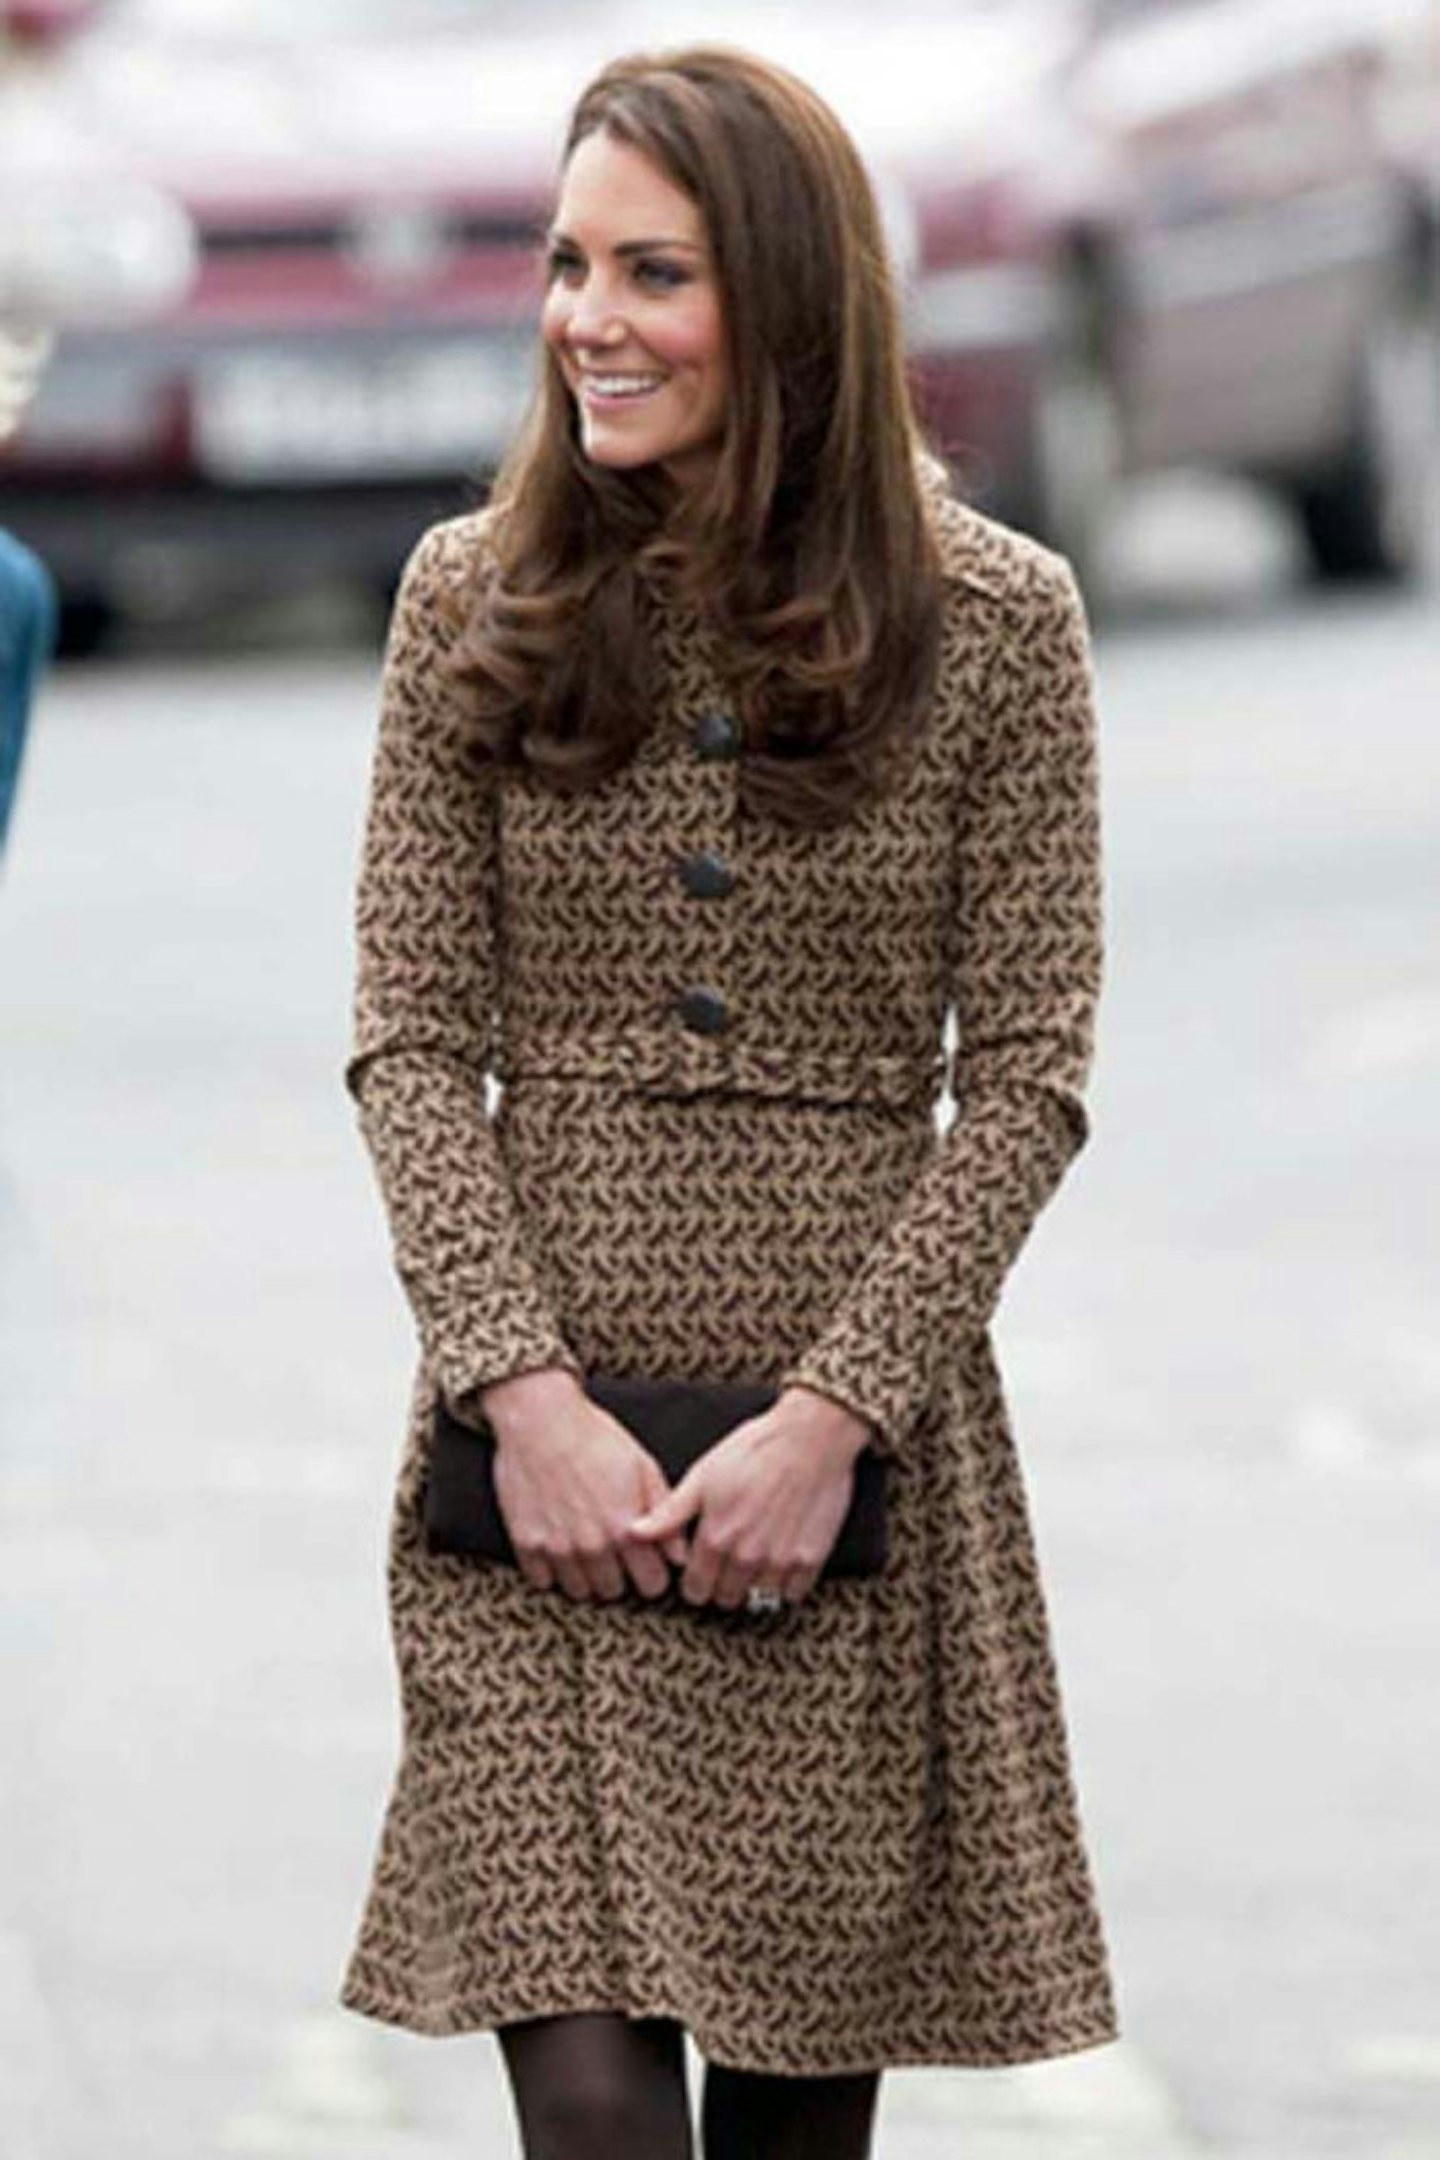 Kate Middleton And Prince William To Have Dinner With Alicia